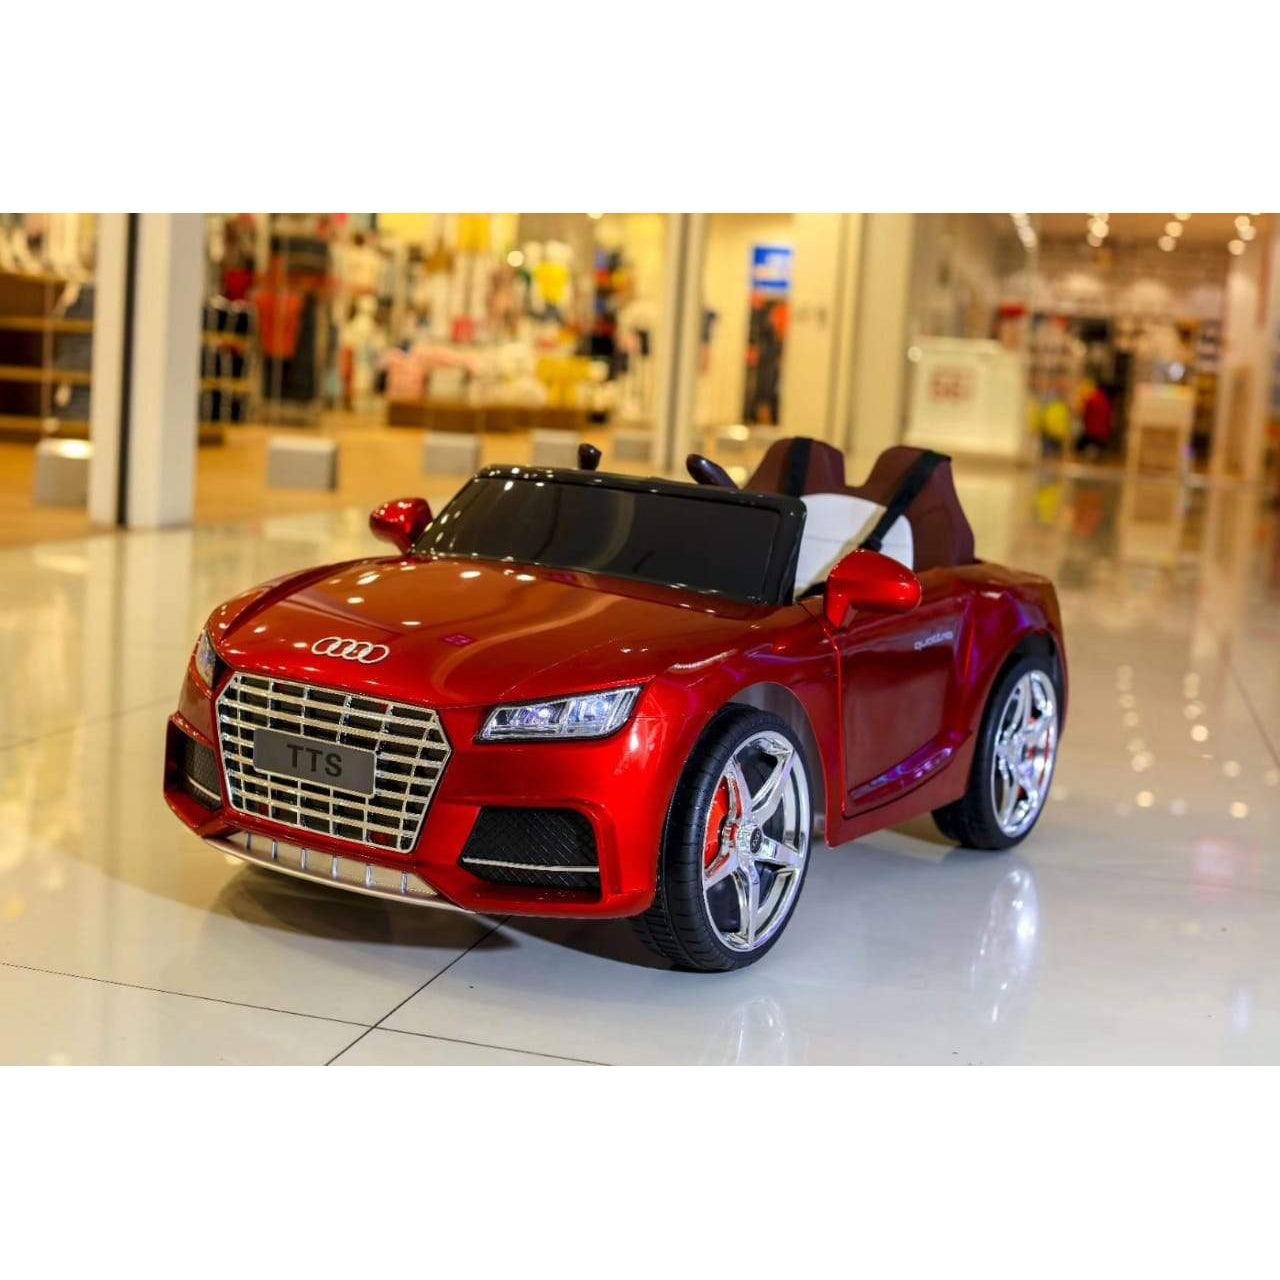 Audi Ride-on Car for Kids with Remote Control | Support MP3 - 11Cart